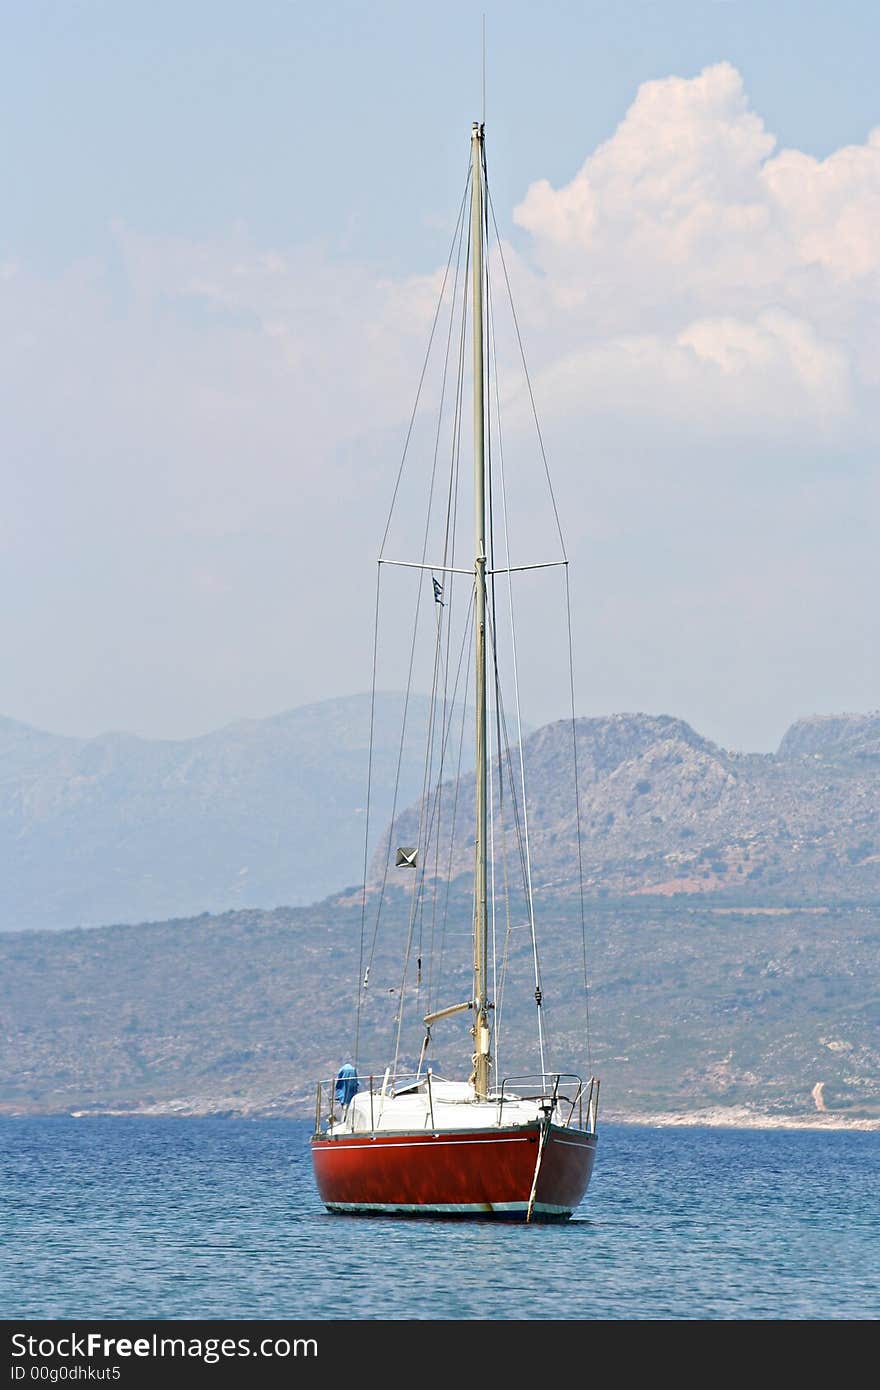 A sailing boat resting on the calm sea. A sailing boat resting on the calm sea